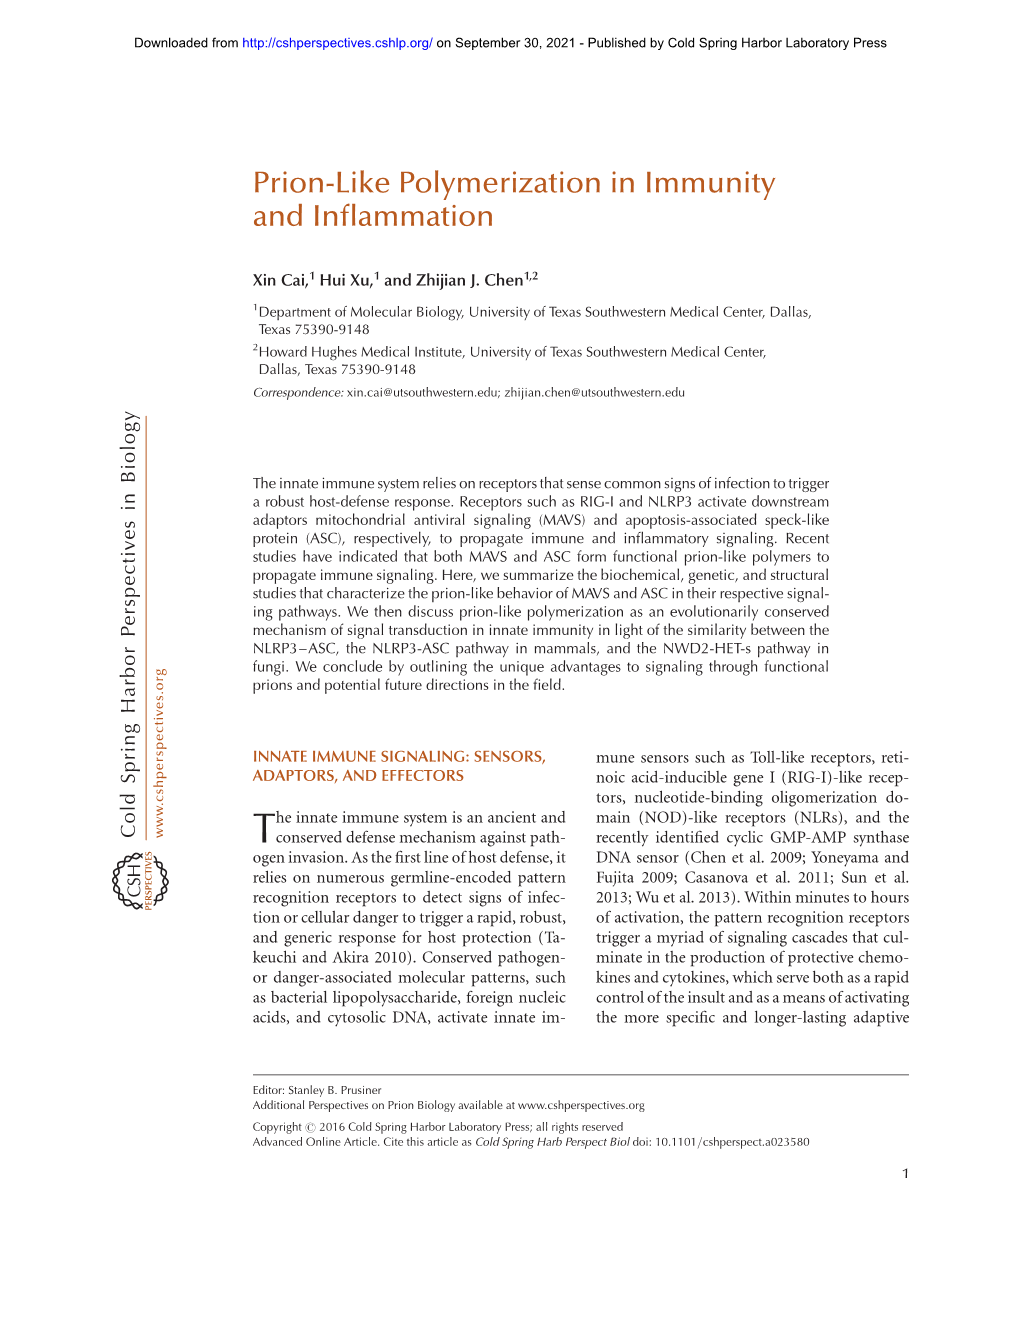 Prion-Like Polymerization in Immunity and Inflammation